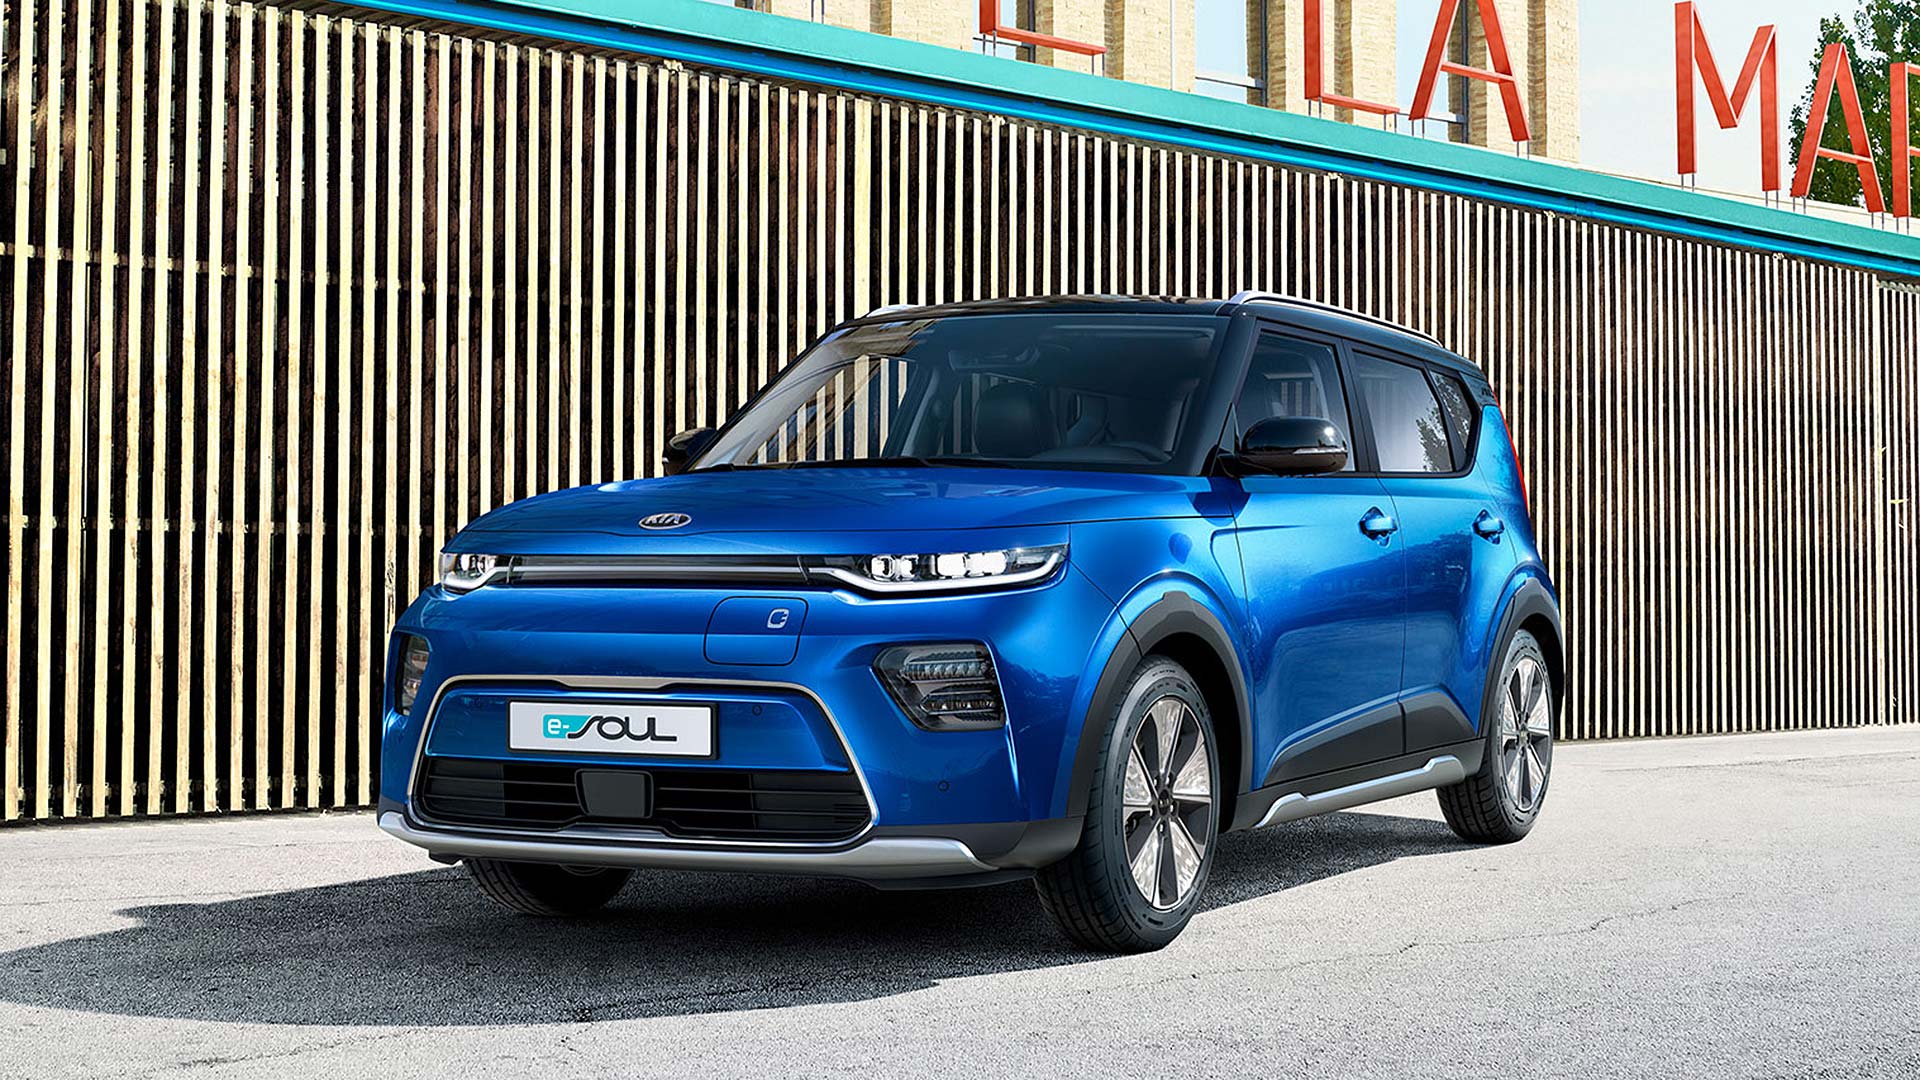 kia-soul-ev-another-real-world-long-range-electric-car-is-coming